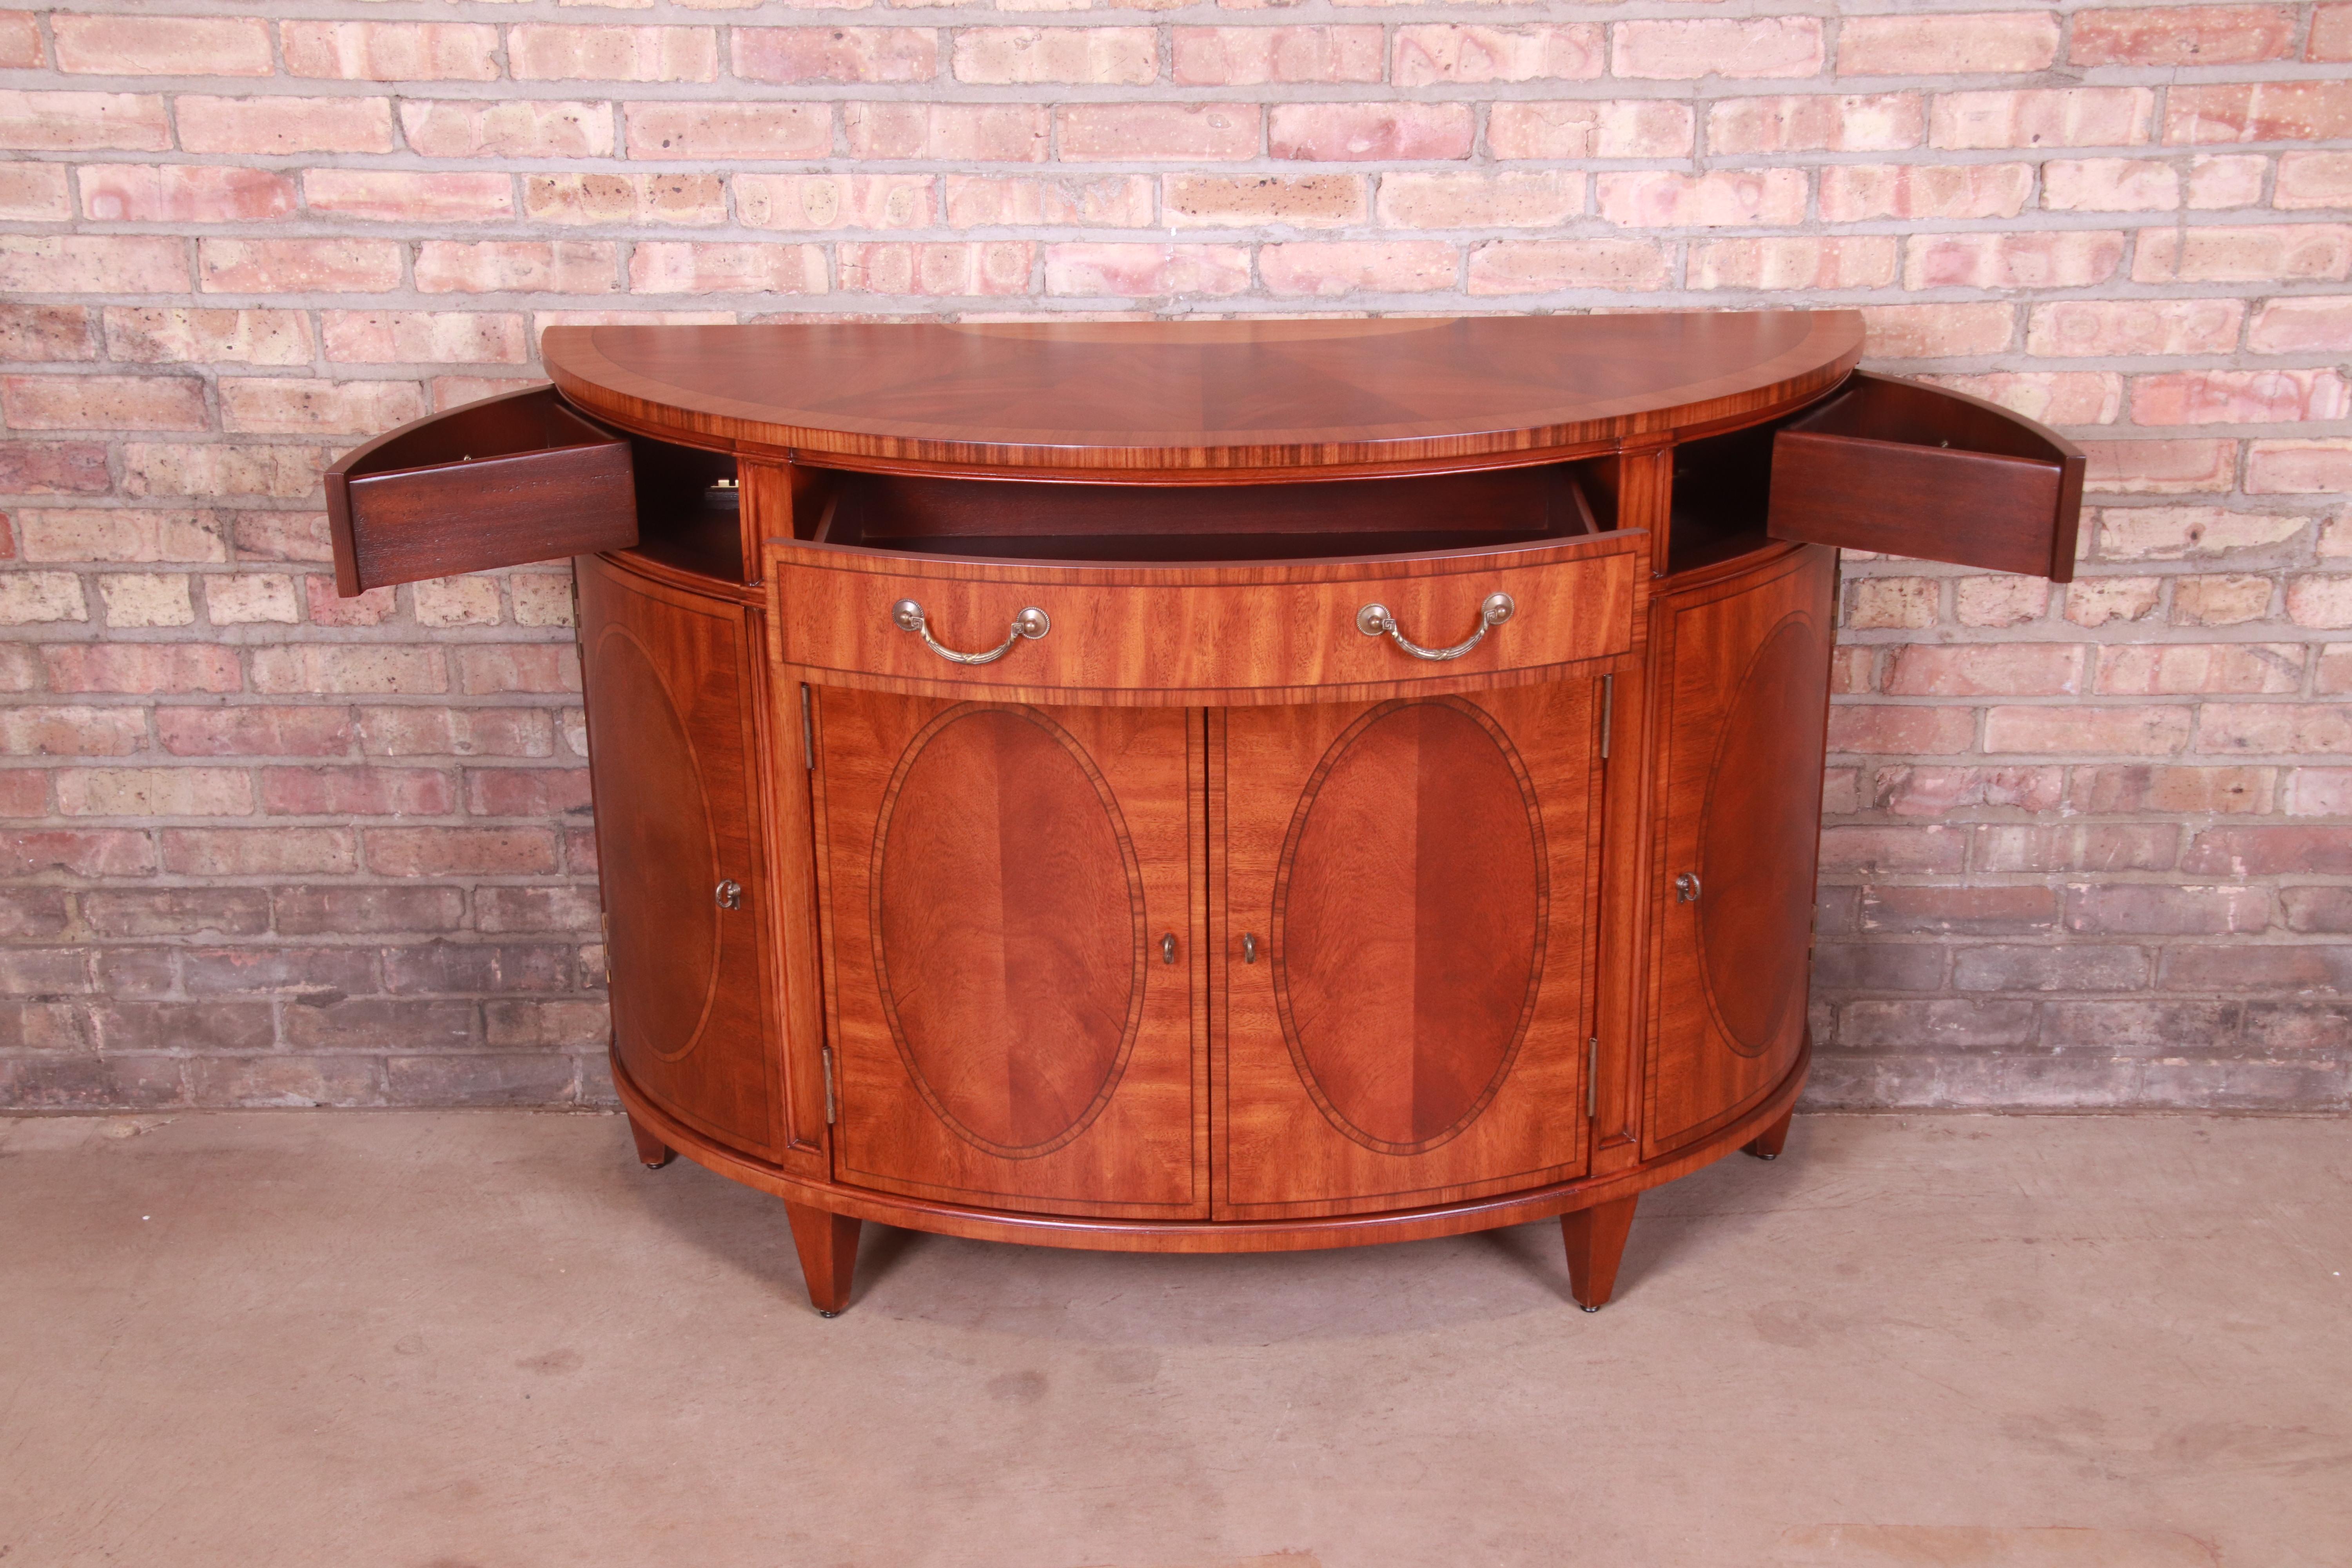 Ethan Allen Regency Inlaid Mahogany Demilune Console or Bar Cabinet, Refinished 1